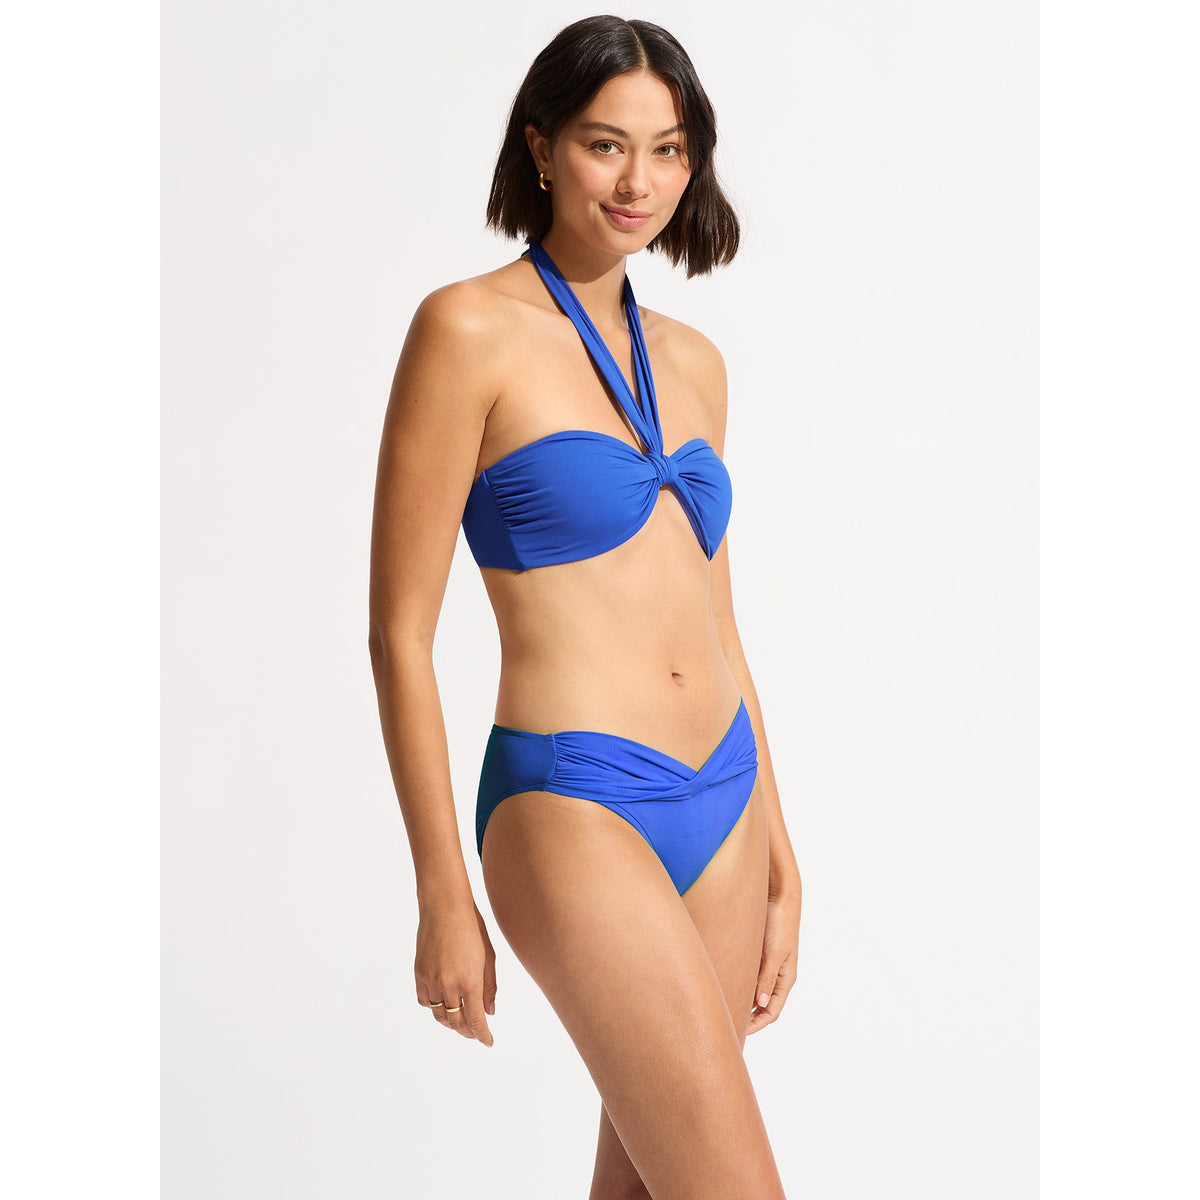 Seafolly Collective Twist Band Hipster